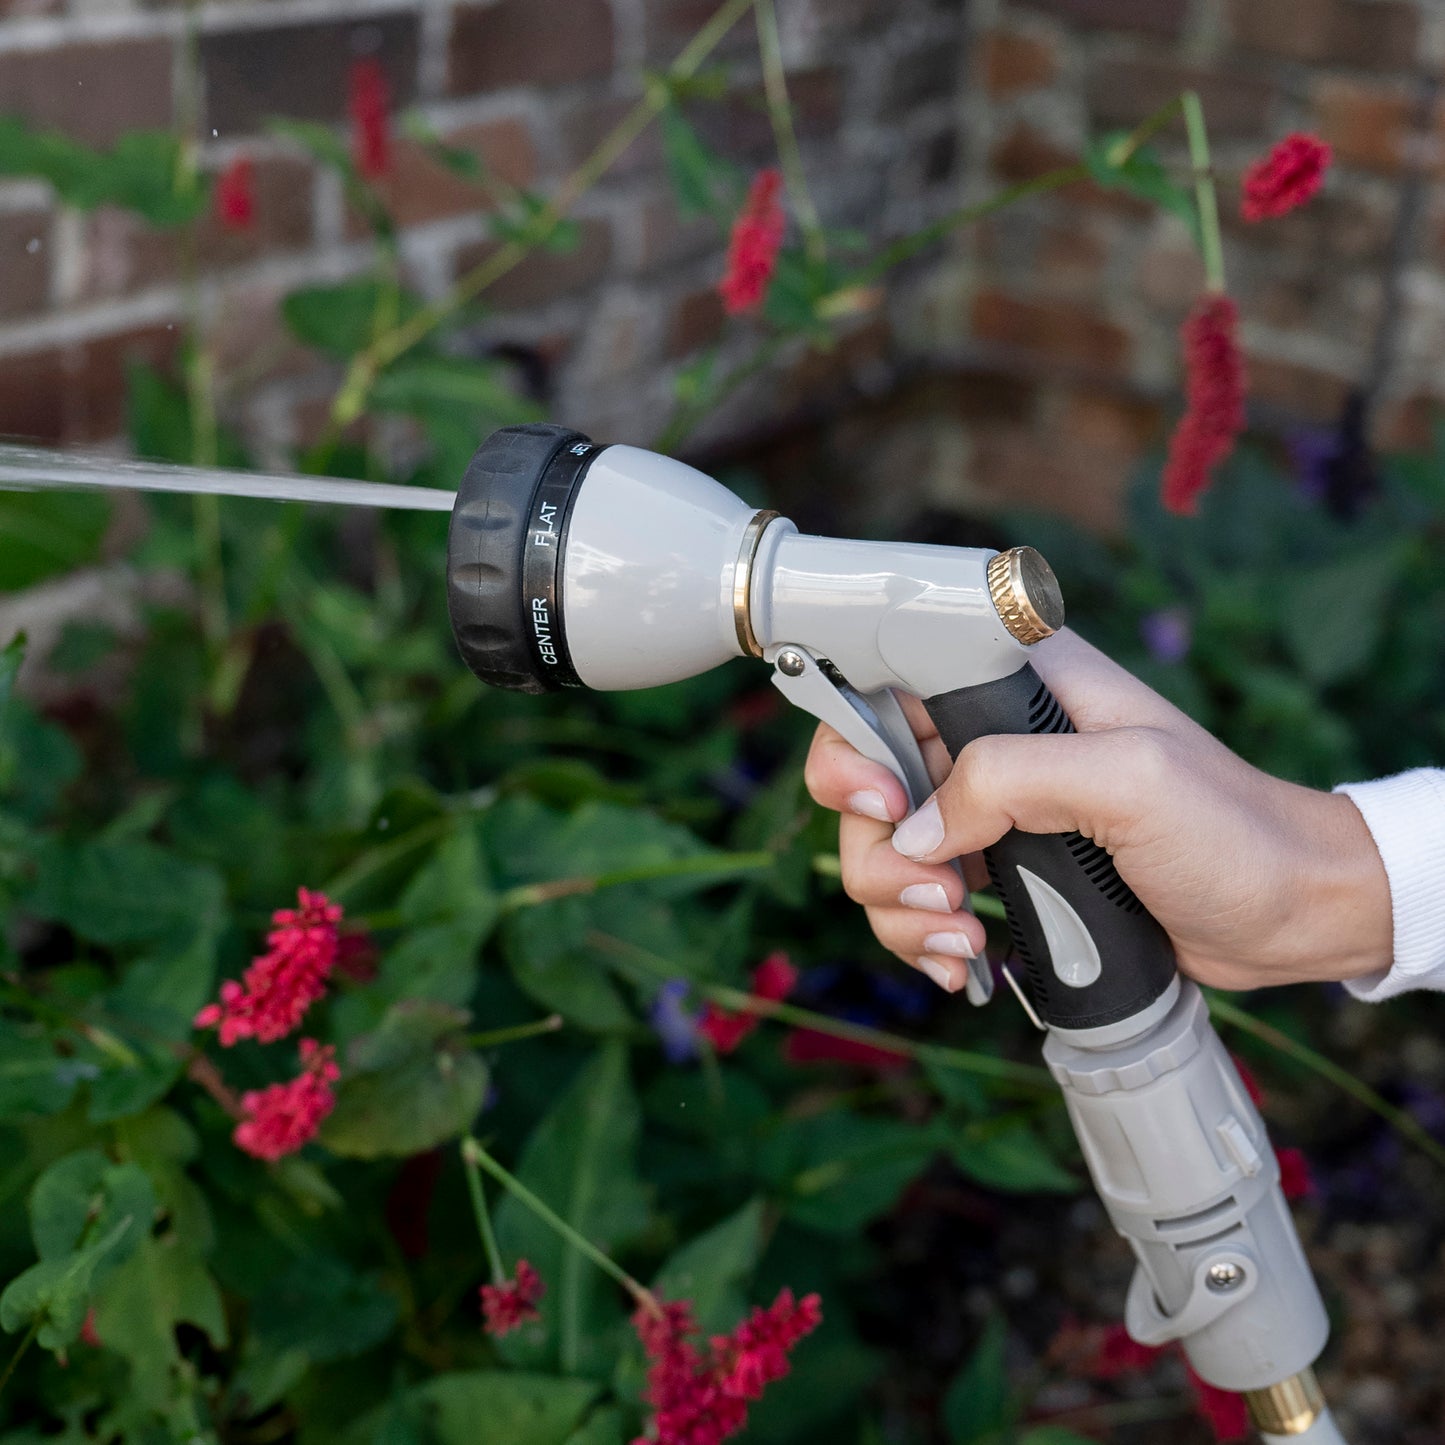 Female holding Metal 7-Function Spray Nozzle using the jet setting in the garden